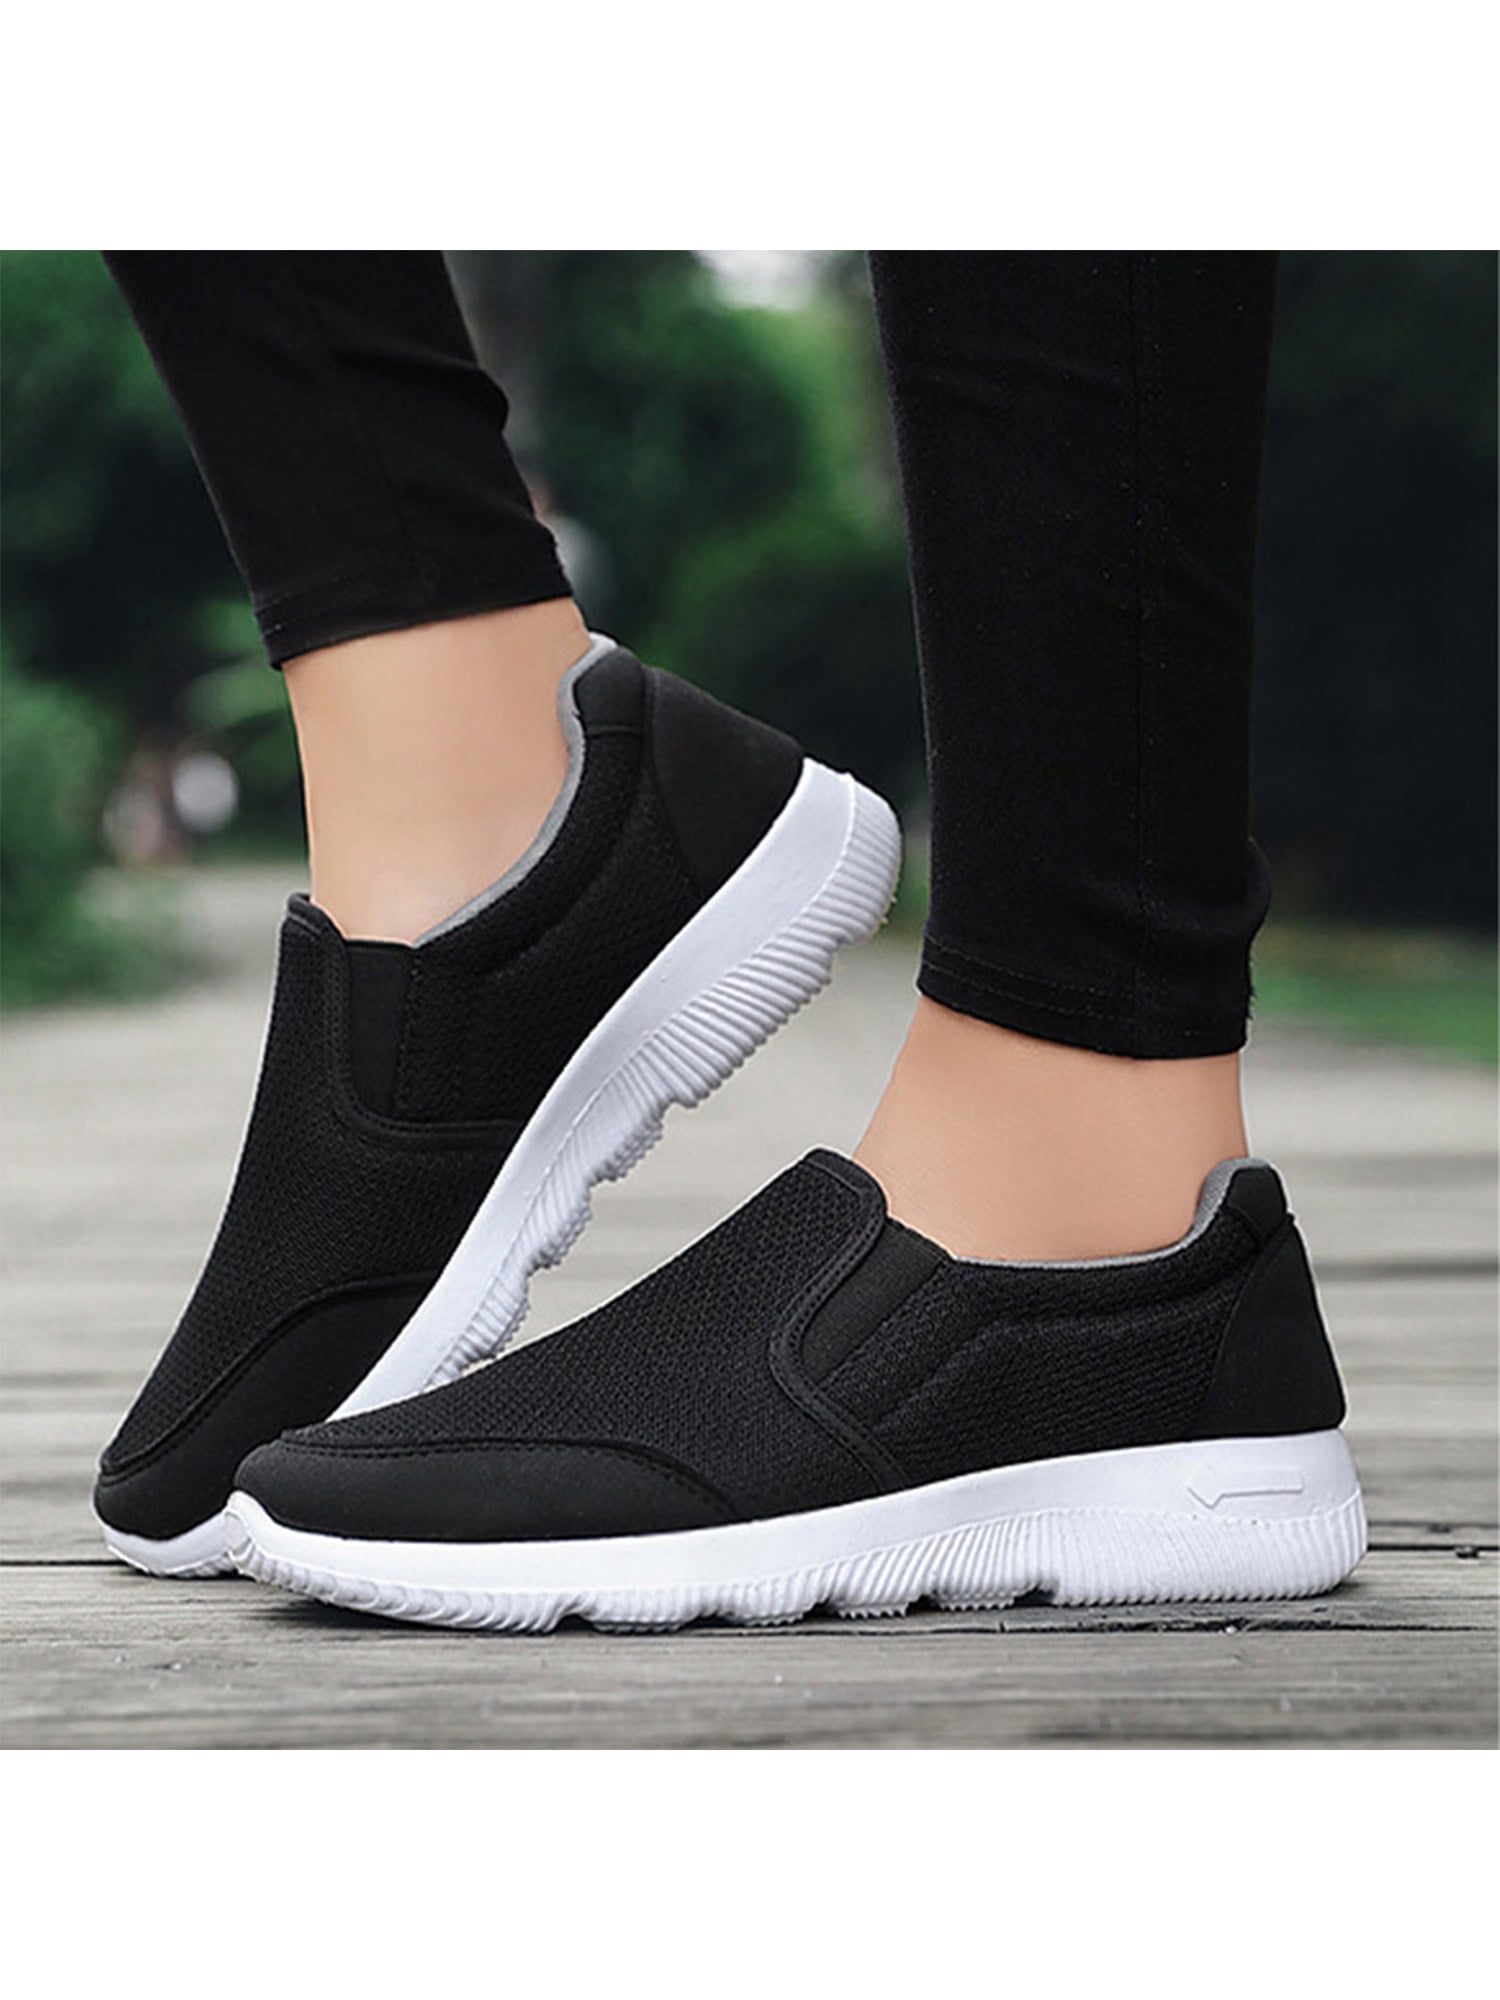 Mens Slip On Walking Shoes Mesh Comfortable Lightweight Shoe Running Sneakers Tennis Breathable Sports Casual Loafers Athletic Sneaker